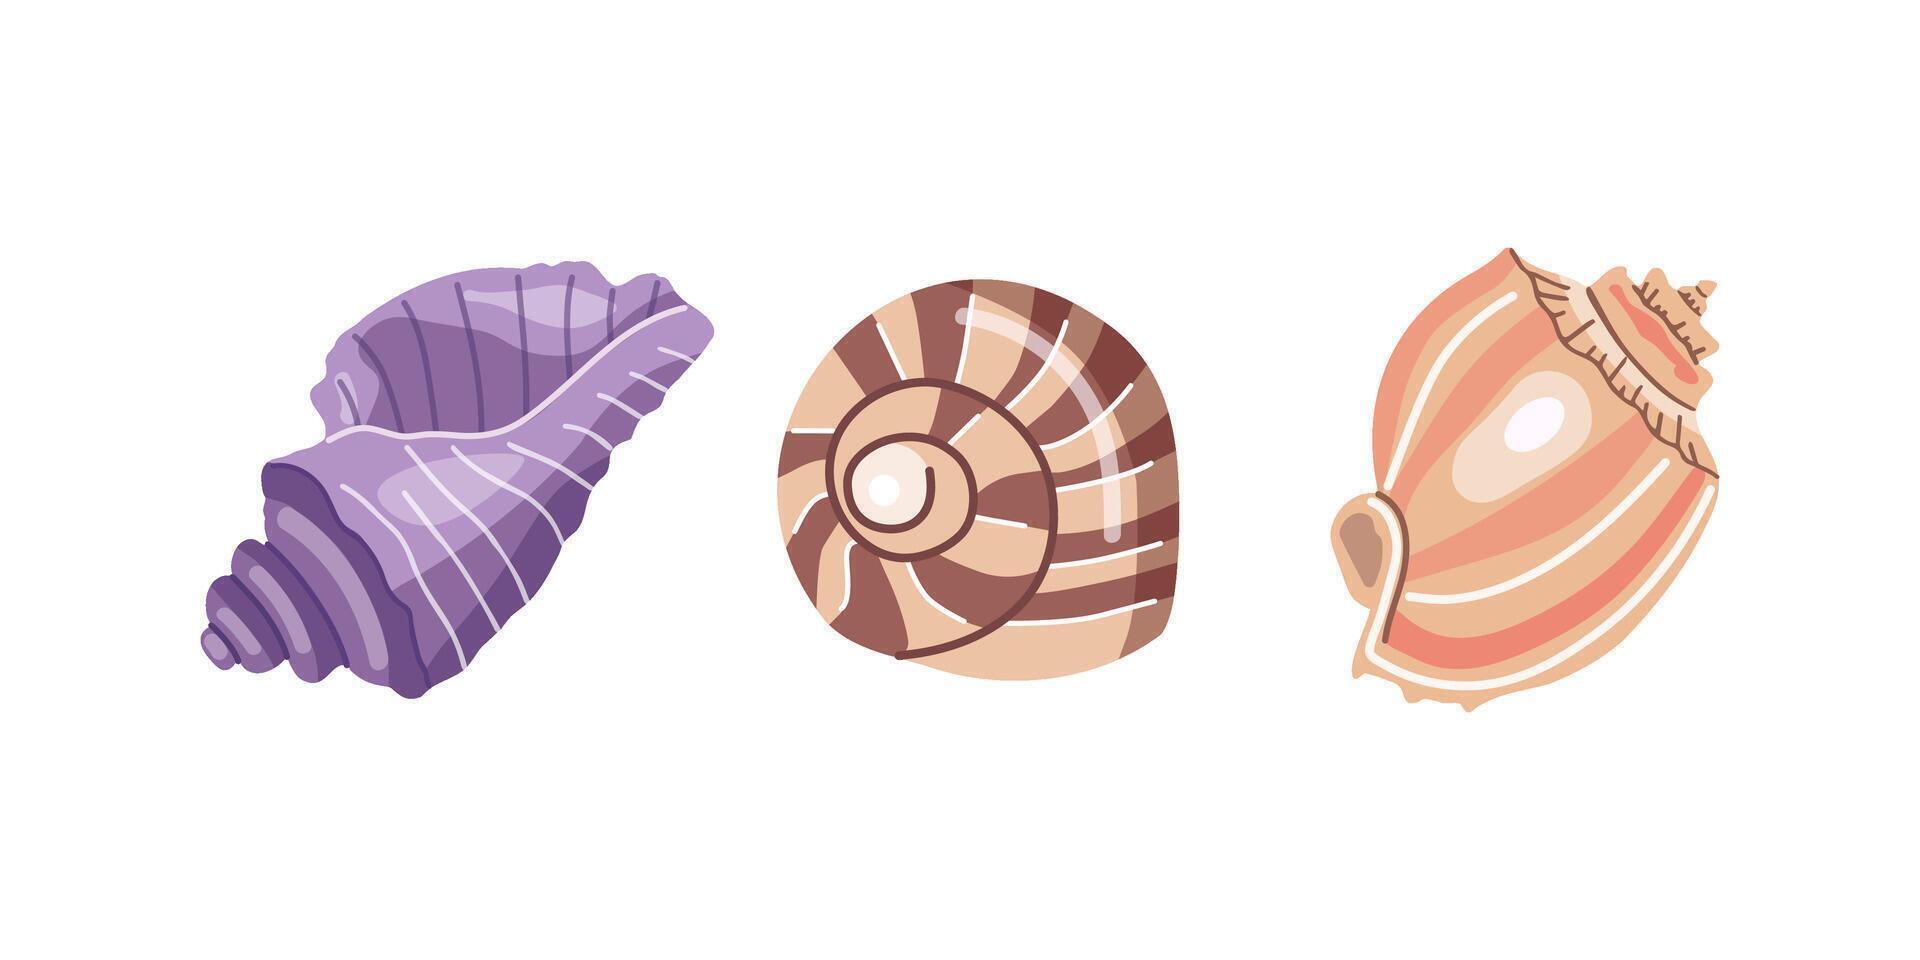 Sea shells vector set, mollusks. Flat illustration of various seashells on white background. Collection for stickers..